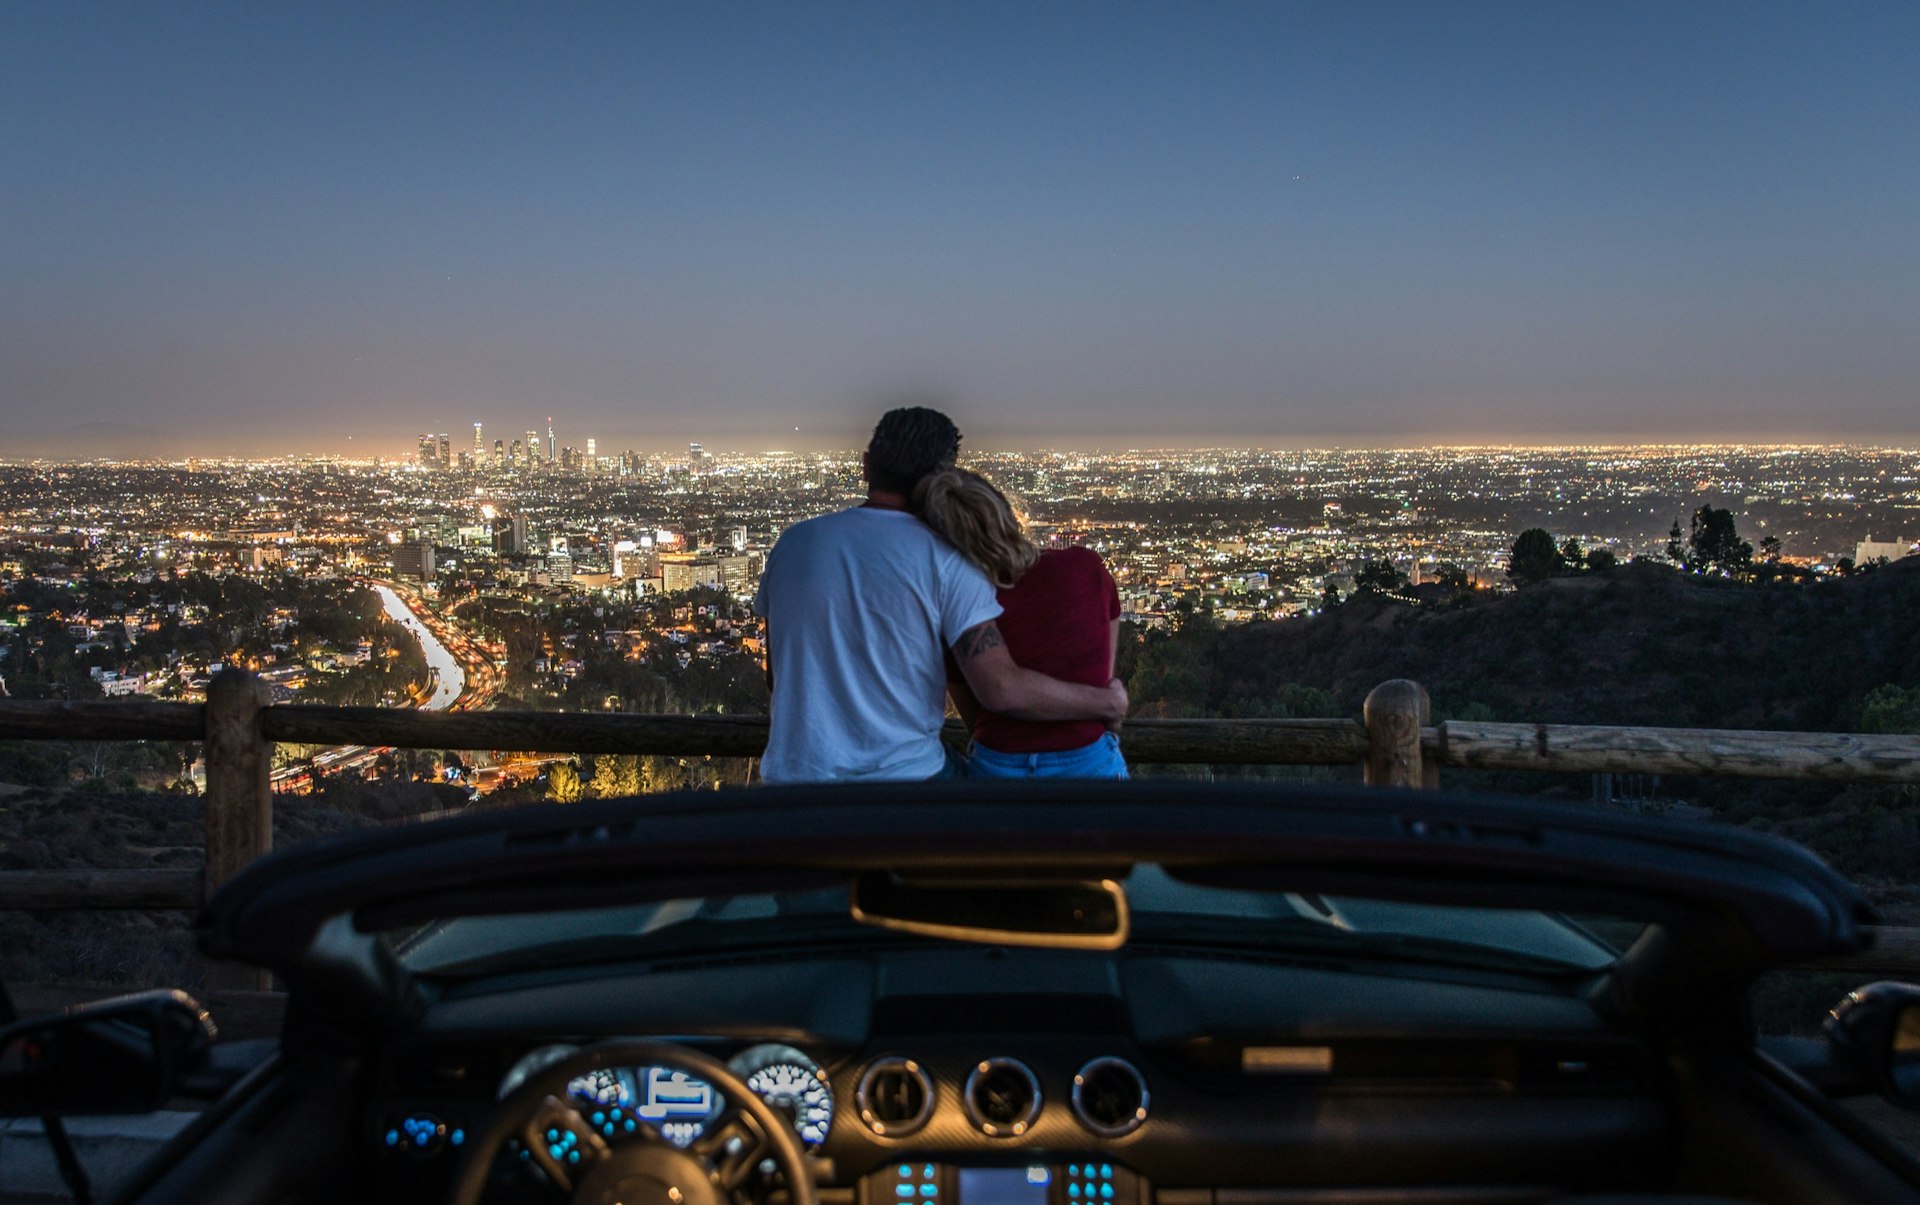 Couple,Enjoying,Skyline,View,From,Their,Car,In,The,Night.